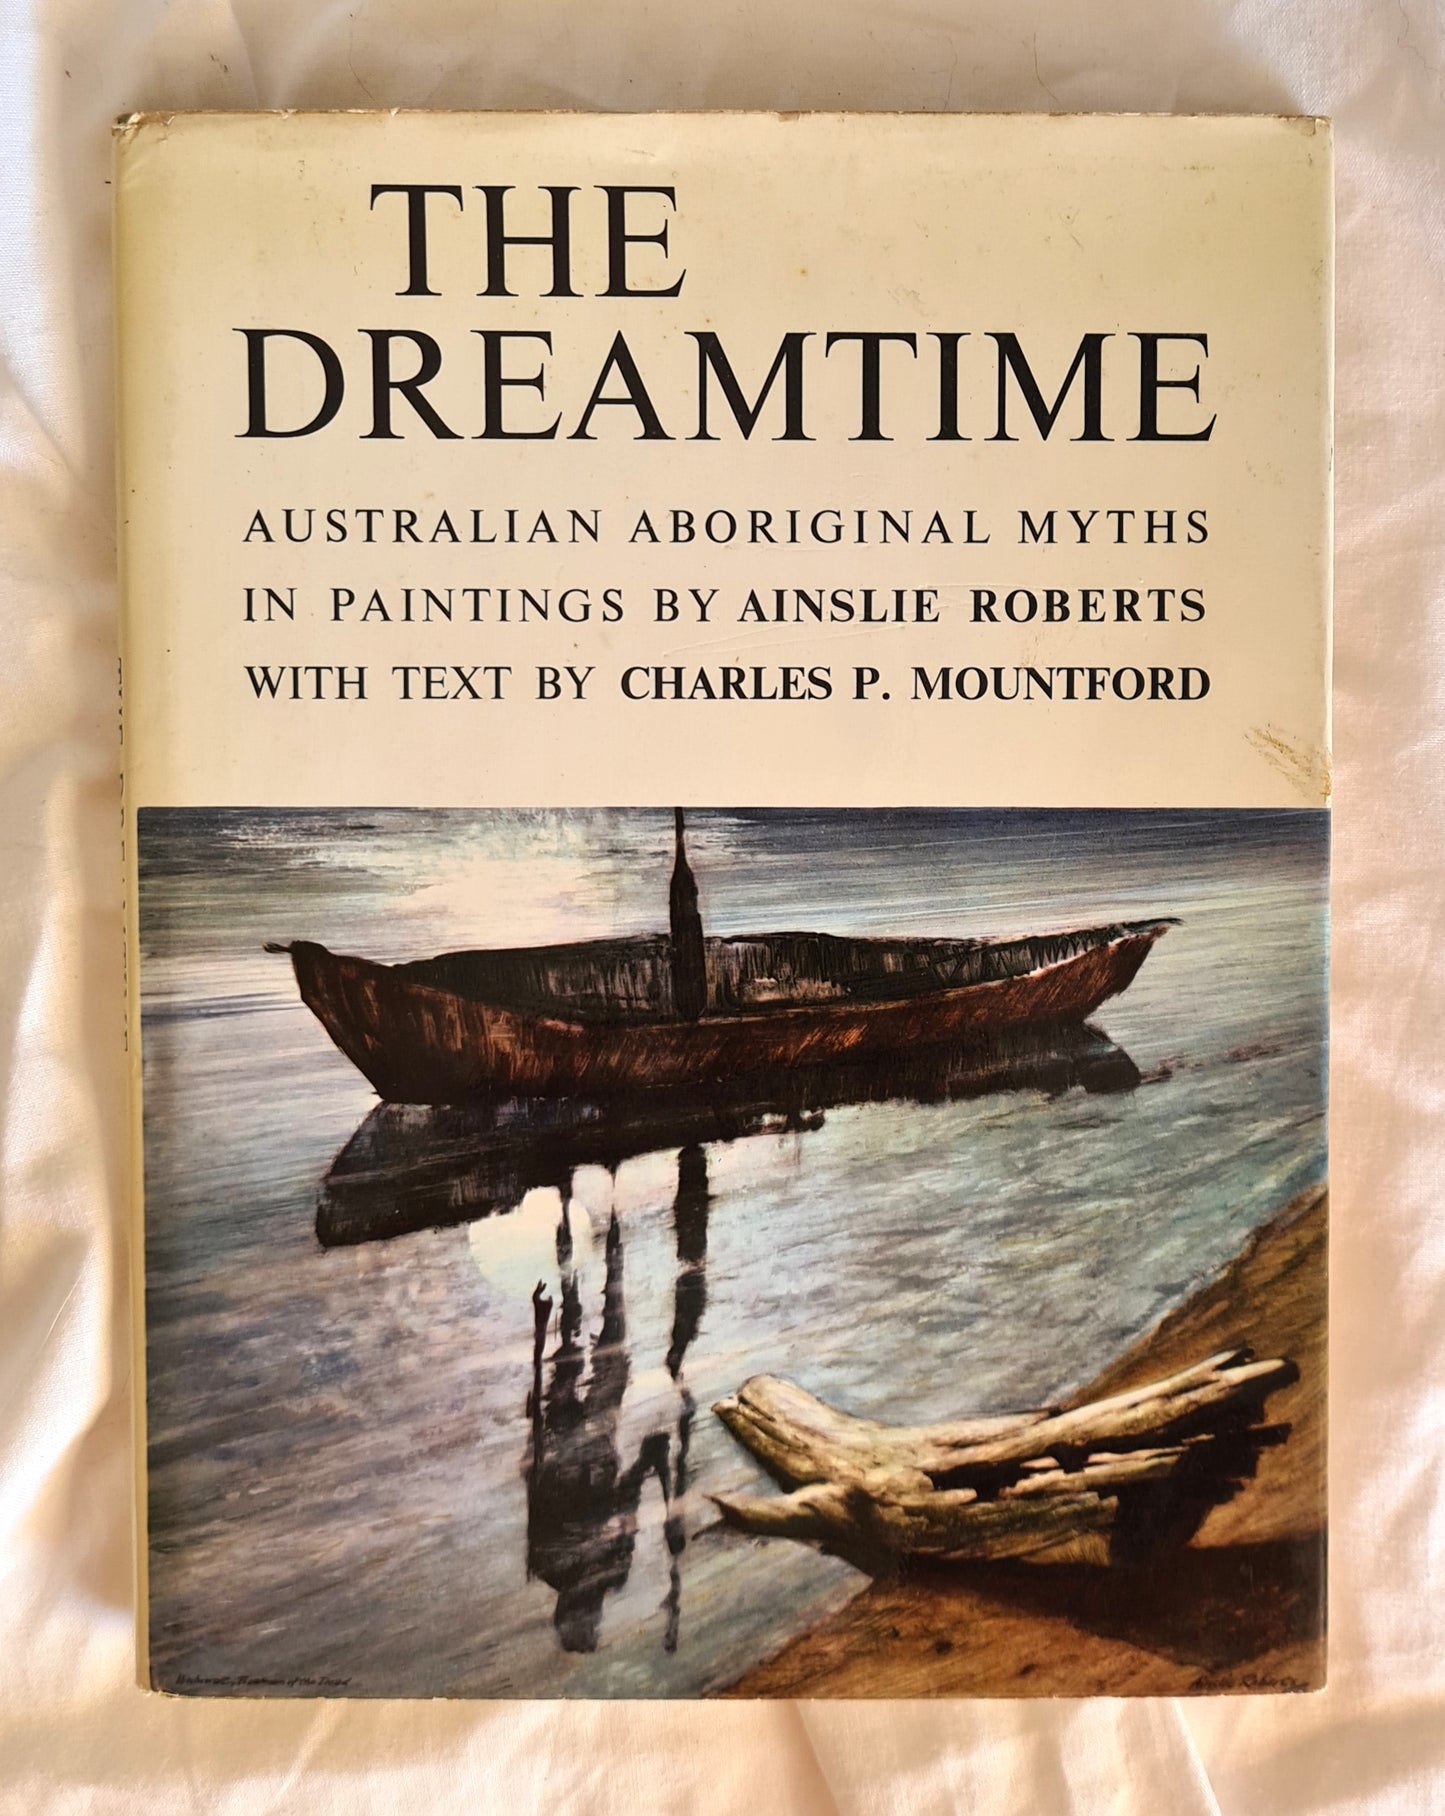 The Dreamtime  Australian Aboriginal Myths in Paintings  by Ainslie Roberts  Text by Charles P. Mountford